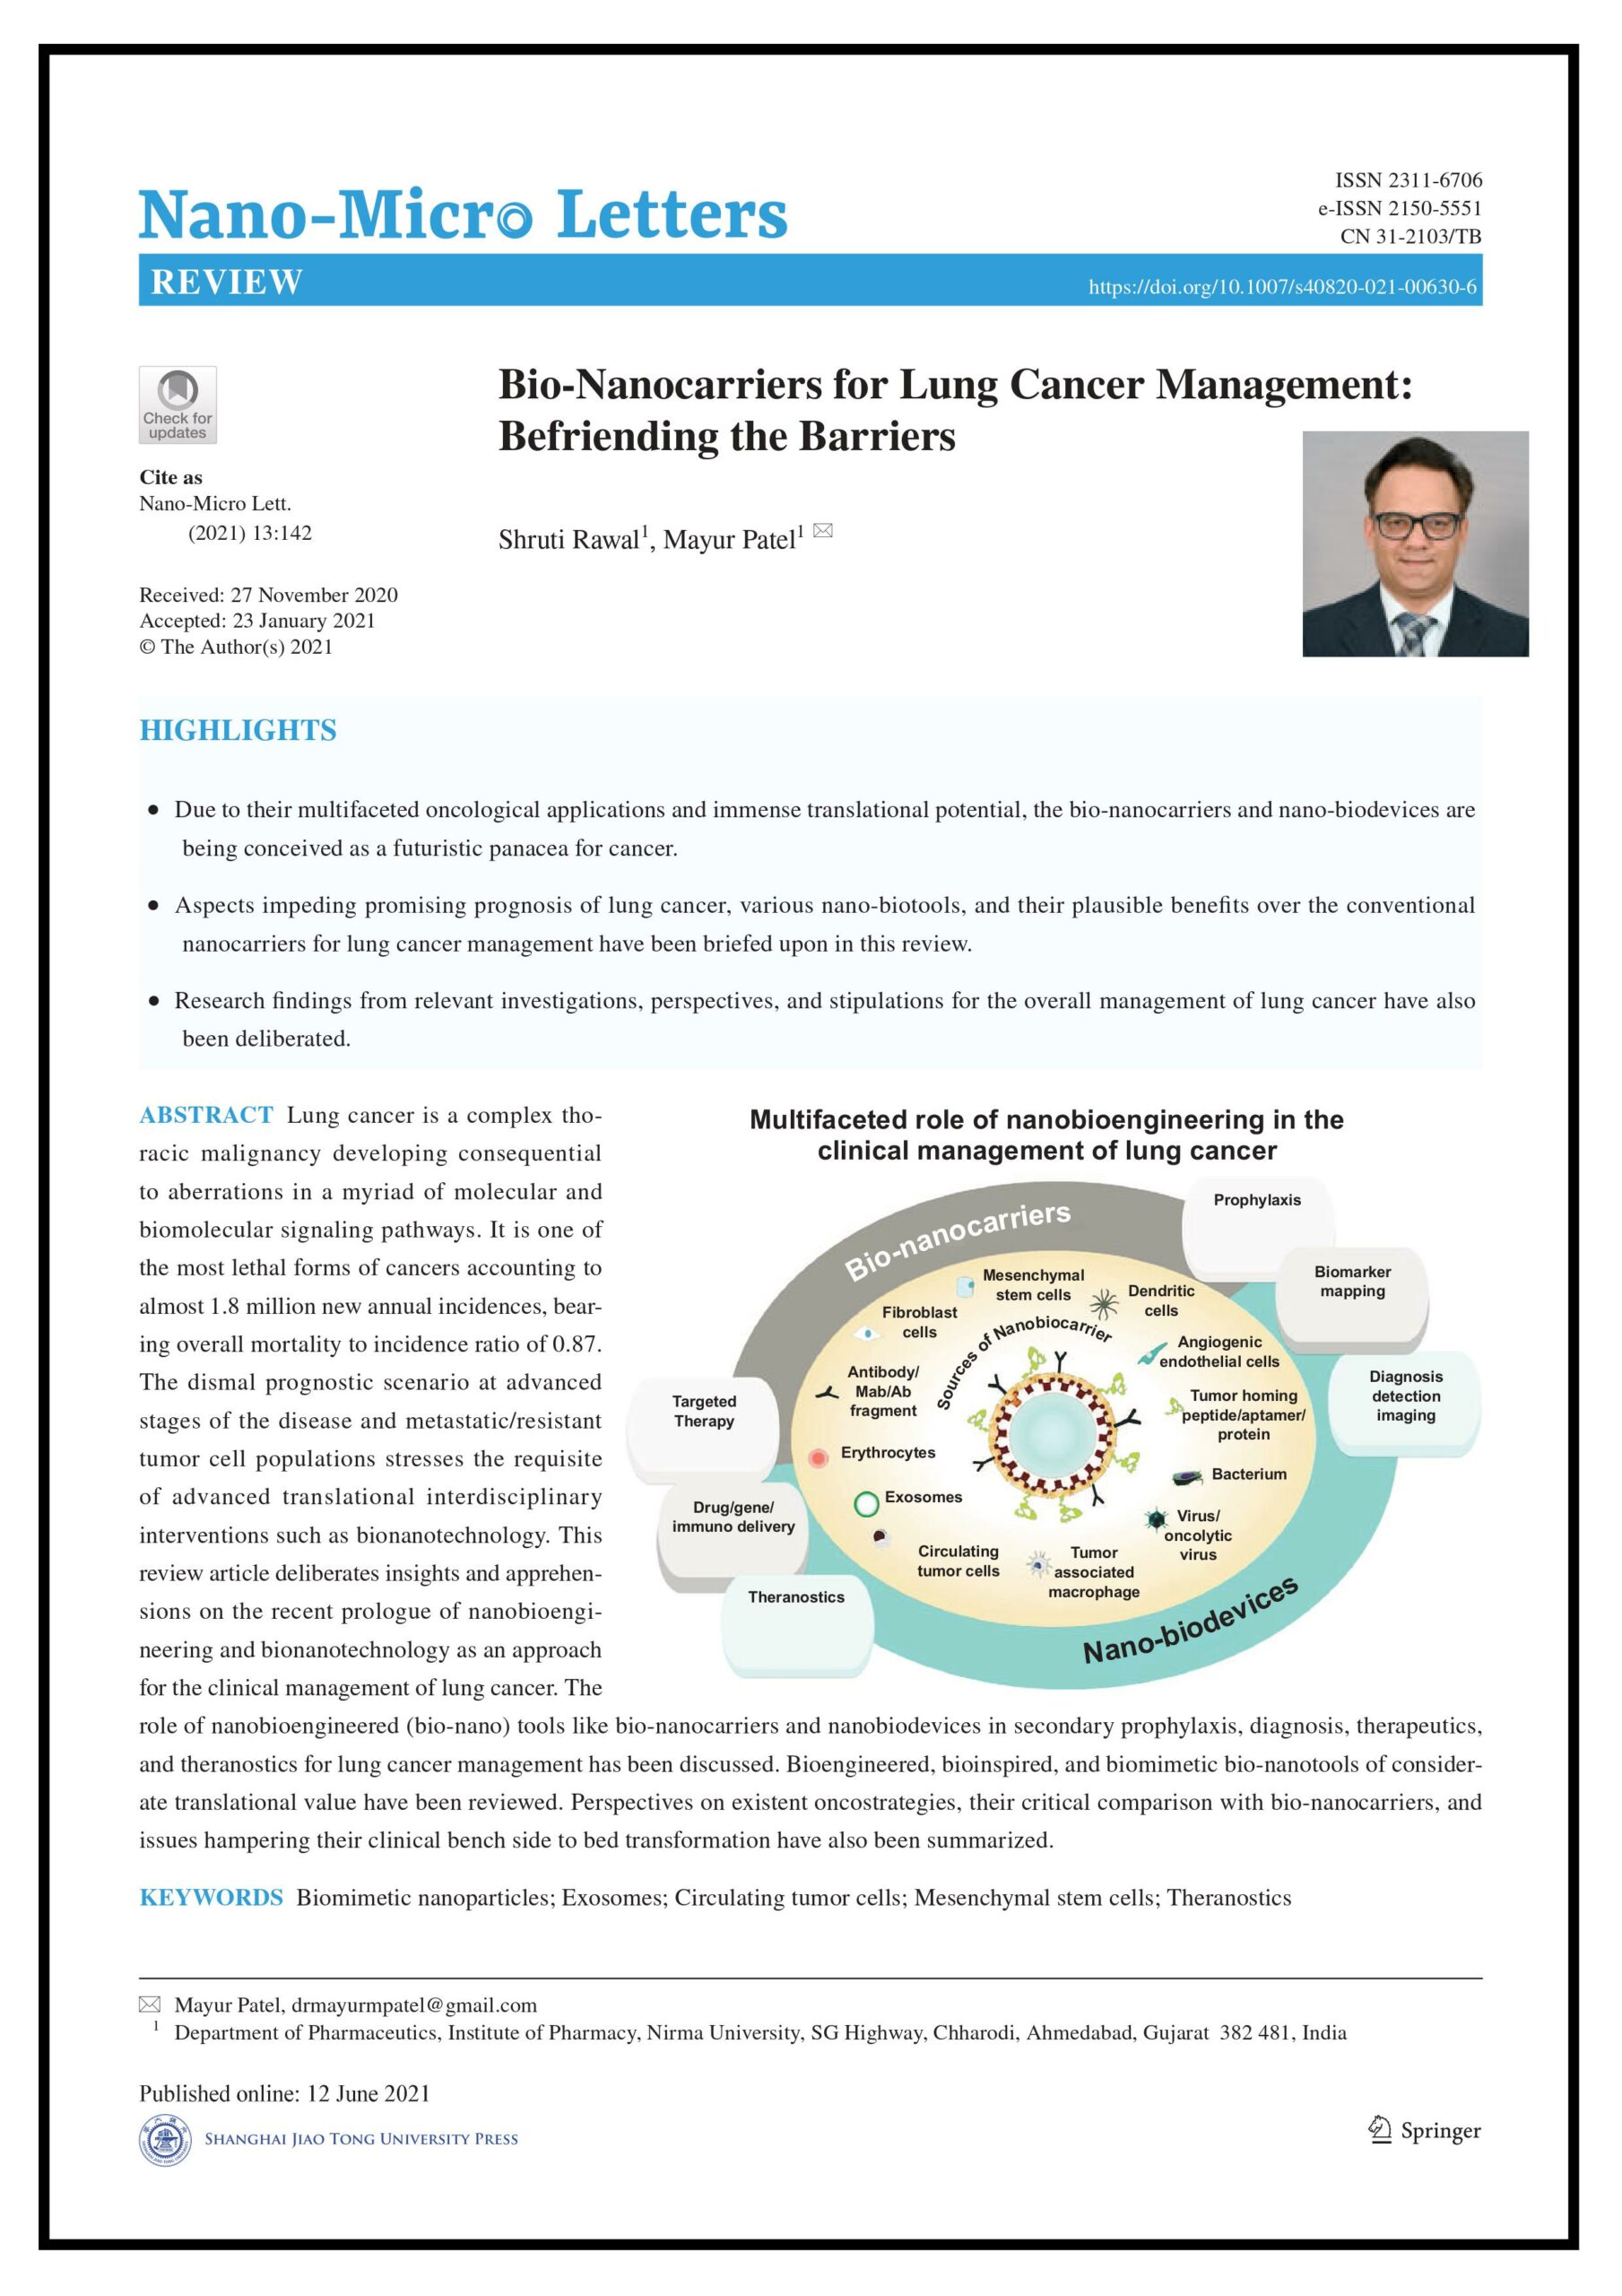 Bio-Nanocarriers for Lung Cancer Management: Befriending the Barriers